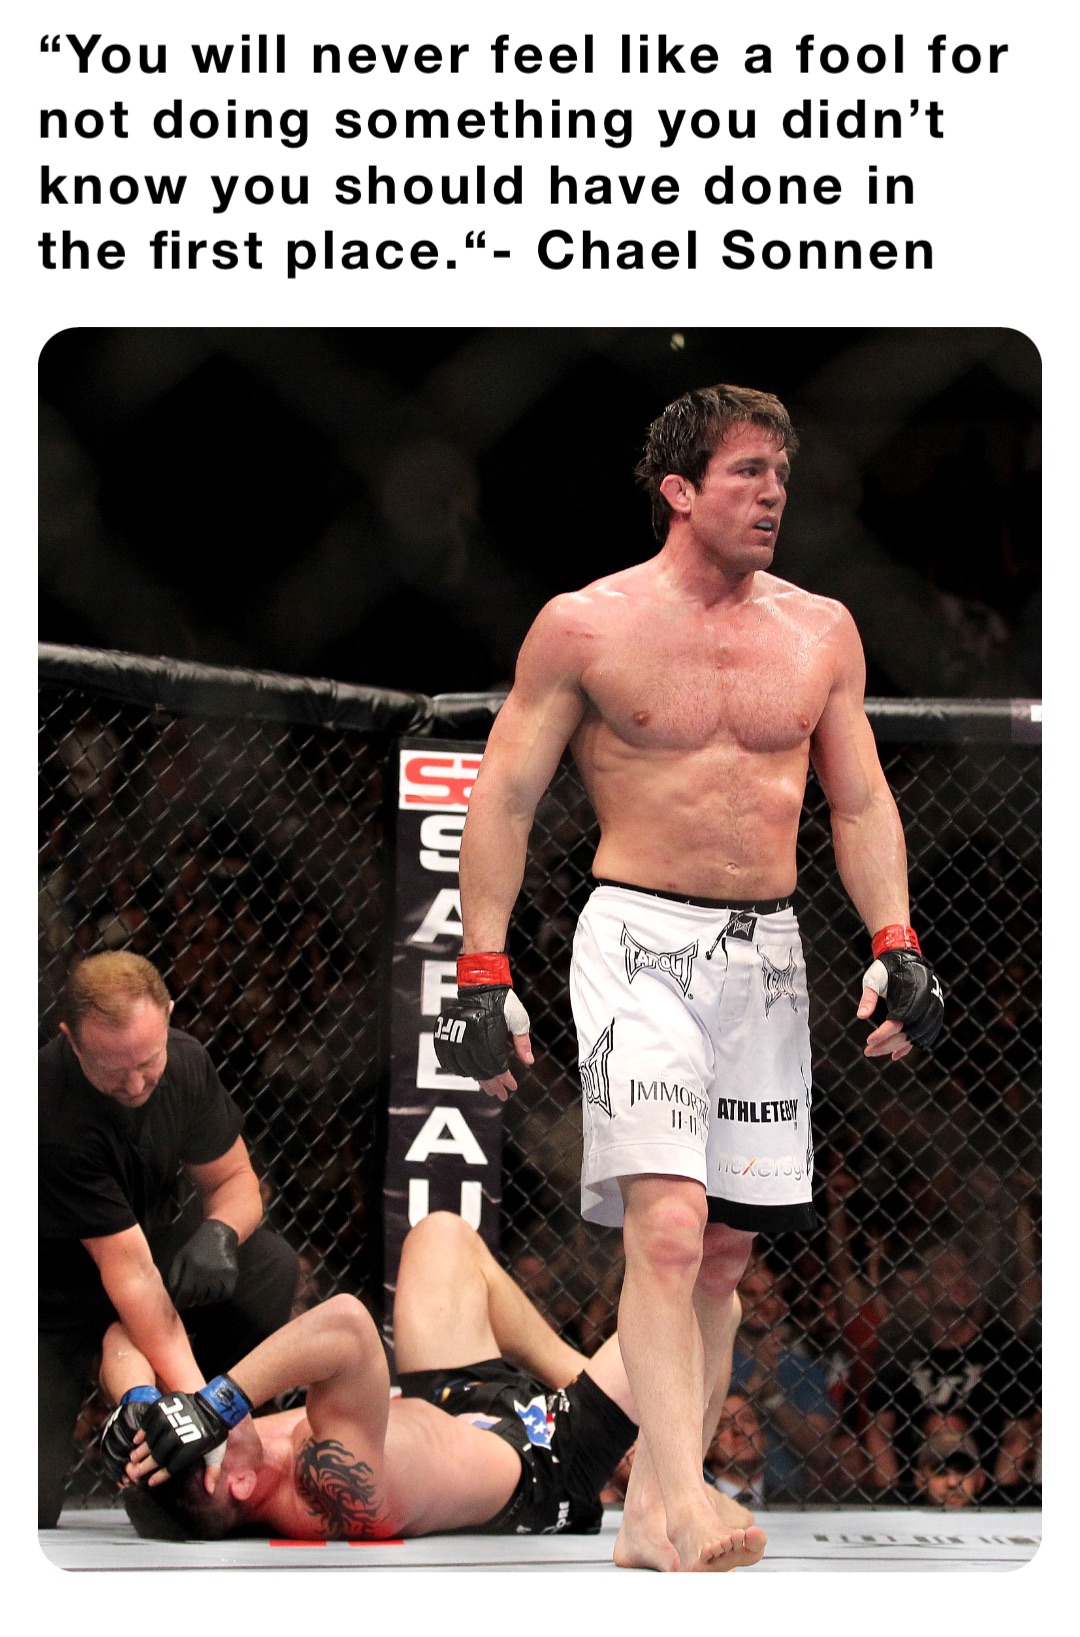 “You will never feel like a fool for not doing something you didn’t know you should have done in the first place.“- Chael Sonnen